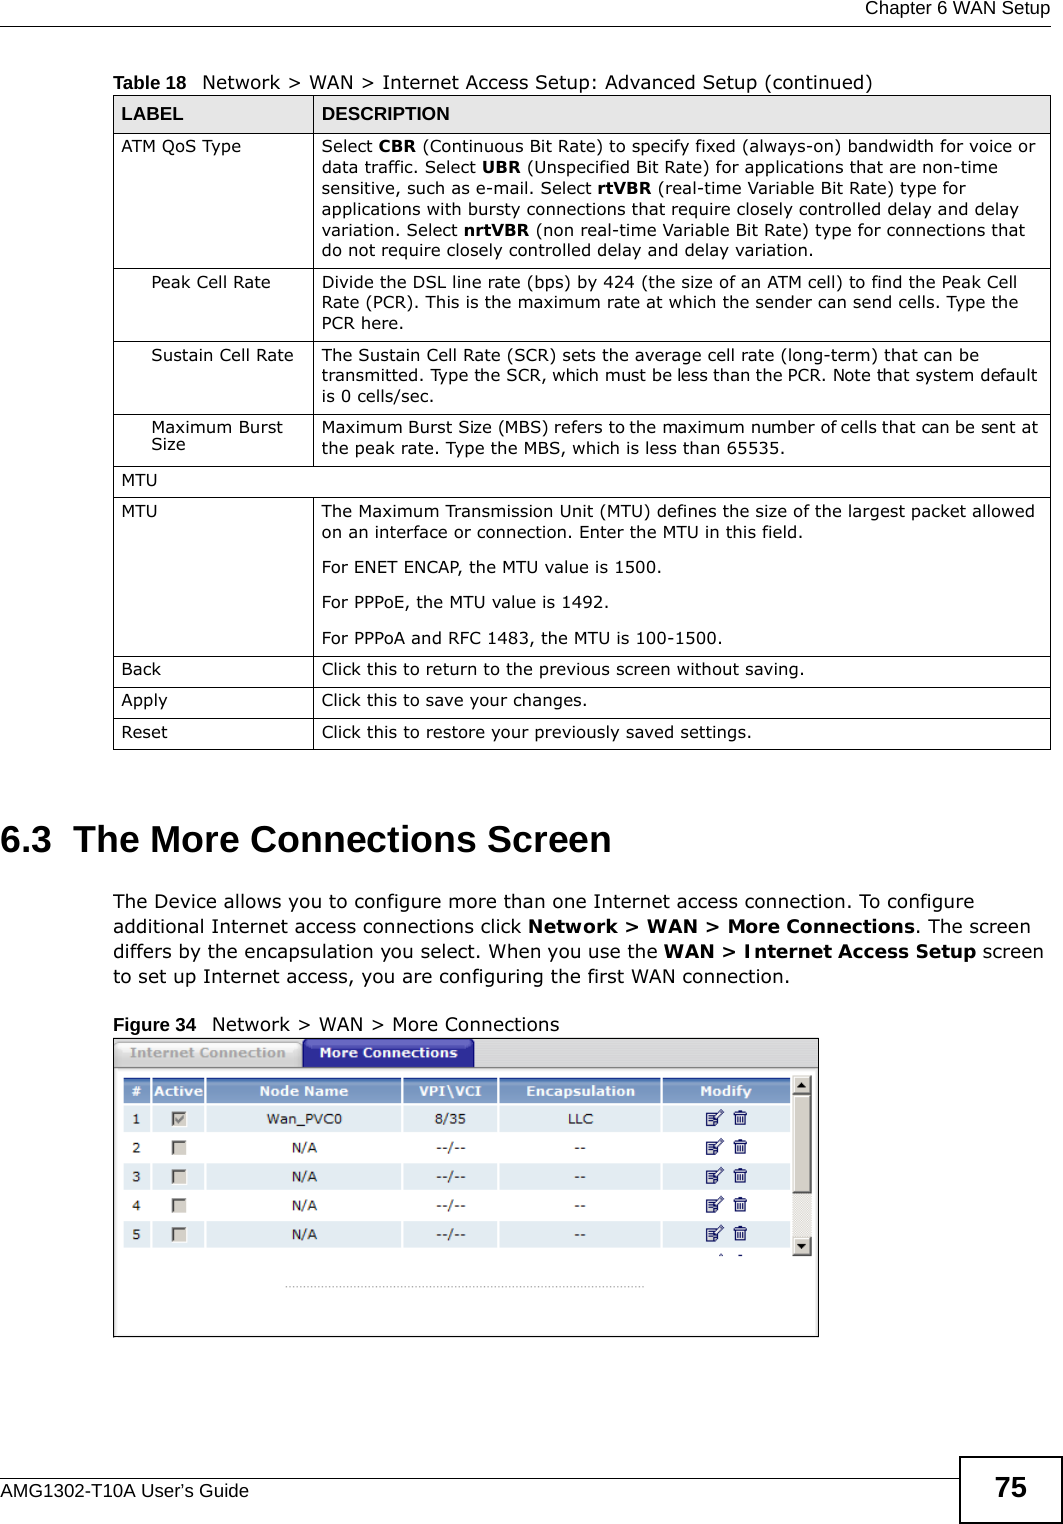  Chapter 6 WAN SetupAMG1302-T10A User’s Guide 756.3  The More Connections ScreenThe Device allows you to configure more than one Internet access connection. To configure additional Internet access connections click Network &gt; WAN &gt; More Connections. The screen differs by the encapsulation you select. When you use the WAN &gt; Internet Access Setup screen to set up Internet access, you are configuring the first WAN connection.Figure 34   Network &gt; WAN &gt; More ConnectionsATM QoS Type Select CBR (Continuous Bit Rate) to specify fixed (always-on) bandwidth for voice or data traffic. Select UBR (Unspecified Bit Rate) for applications that are non-time sensitive, such as e-mail. Select rtVBR (real-time Variable Bit Rate) type for applications with bursty connections that require closely controlled delay and delay variation. Select nrtVBR (non real-time Variable Bit Rate) type for connections that do not require closely controlled delay and delay variation.Peak Cell Rate Divide the DSL line rate (bps) by 424 (the size of an ATM cell) to find the Peak Cell Rate (PCR). This is the maximum rate at which the sender can send cells. Type the PCR here.Sustain Cell Rate The Sustain Cell Rate (SCR) sets the average cell rate (long-term) that can be transmitted. Type the SCR, which must be less than the PCR. Note that system default is 0 cells/sec. Maximum Burst Size Maximum Burst Size (MBS) refers to the maximum number of cells that can be sent at the peak rate. Type the MBS, which is less than 65535. MTUMTU The Maximum Transmission Unit (MTU) defines the size of the largest packet allowed on an interface or connection. Enter the MTU in this field.For ENET ENCAP, the MTU value is 1500.For PPPoE, the MTU value is 1492.For PPPoA and RFC 1483, the MTU is 100-1500.Back Click this to return to the previous screen without saving.Apply Click this to save your changes. Reset Click this to restore your previously saved settings.Table 18   Network &gt; WAN &gt; Internet Access Setup: Advanced Setup (continued)LABEL DESCRIPTION